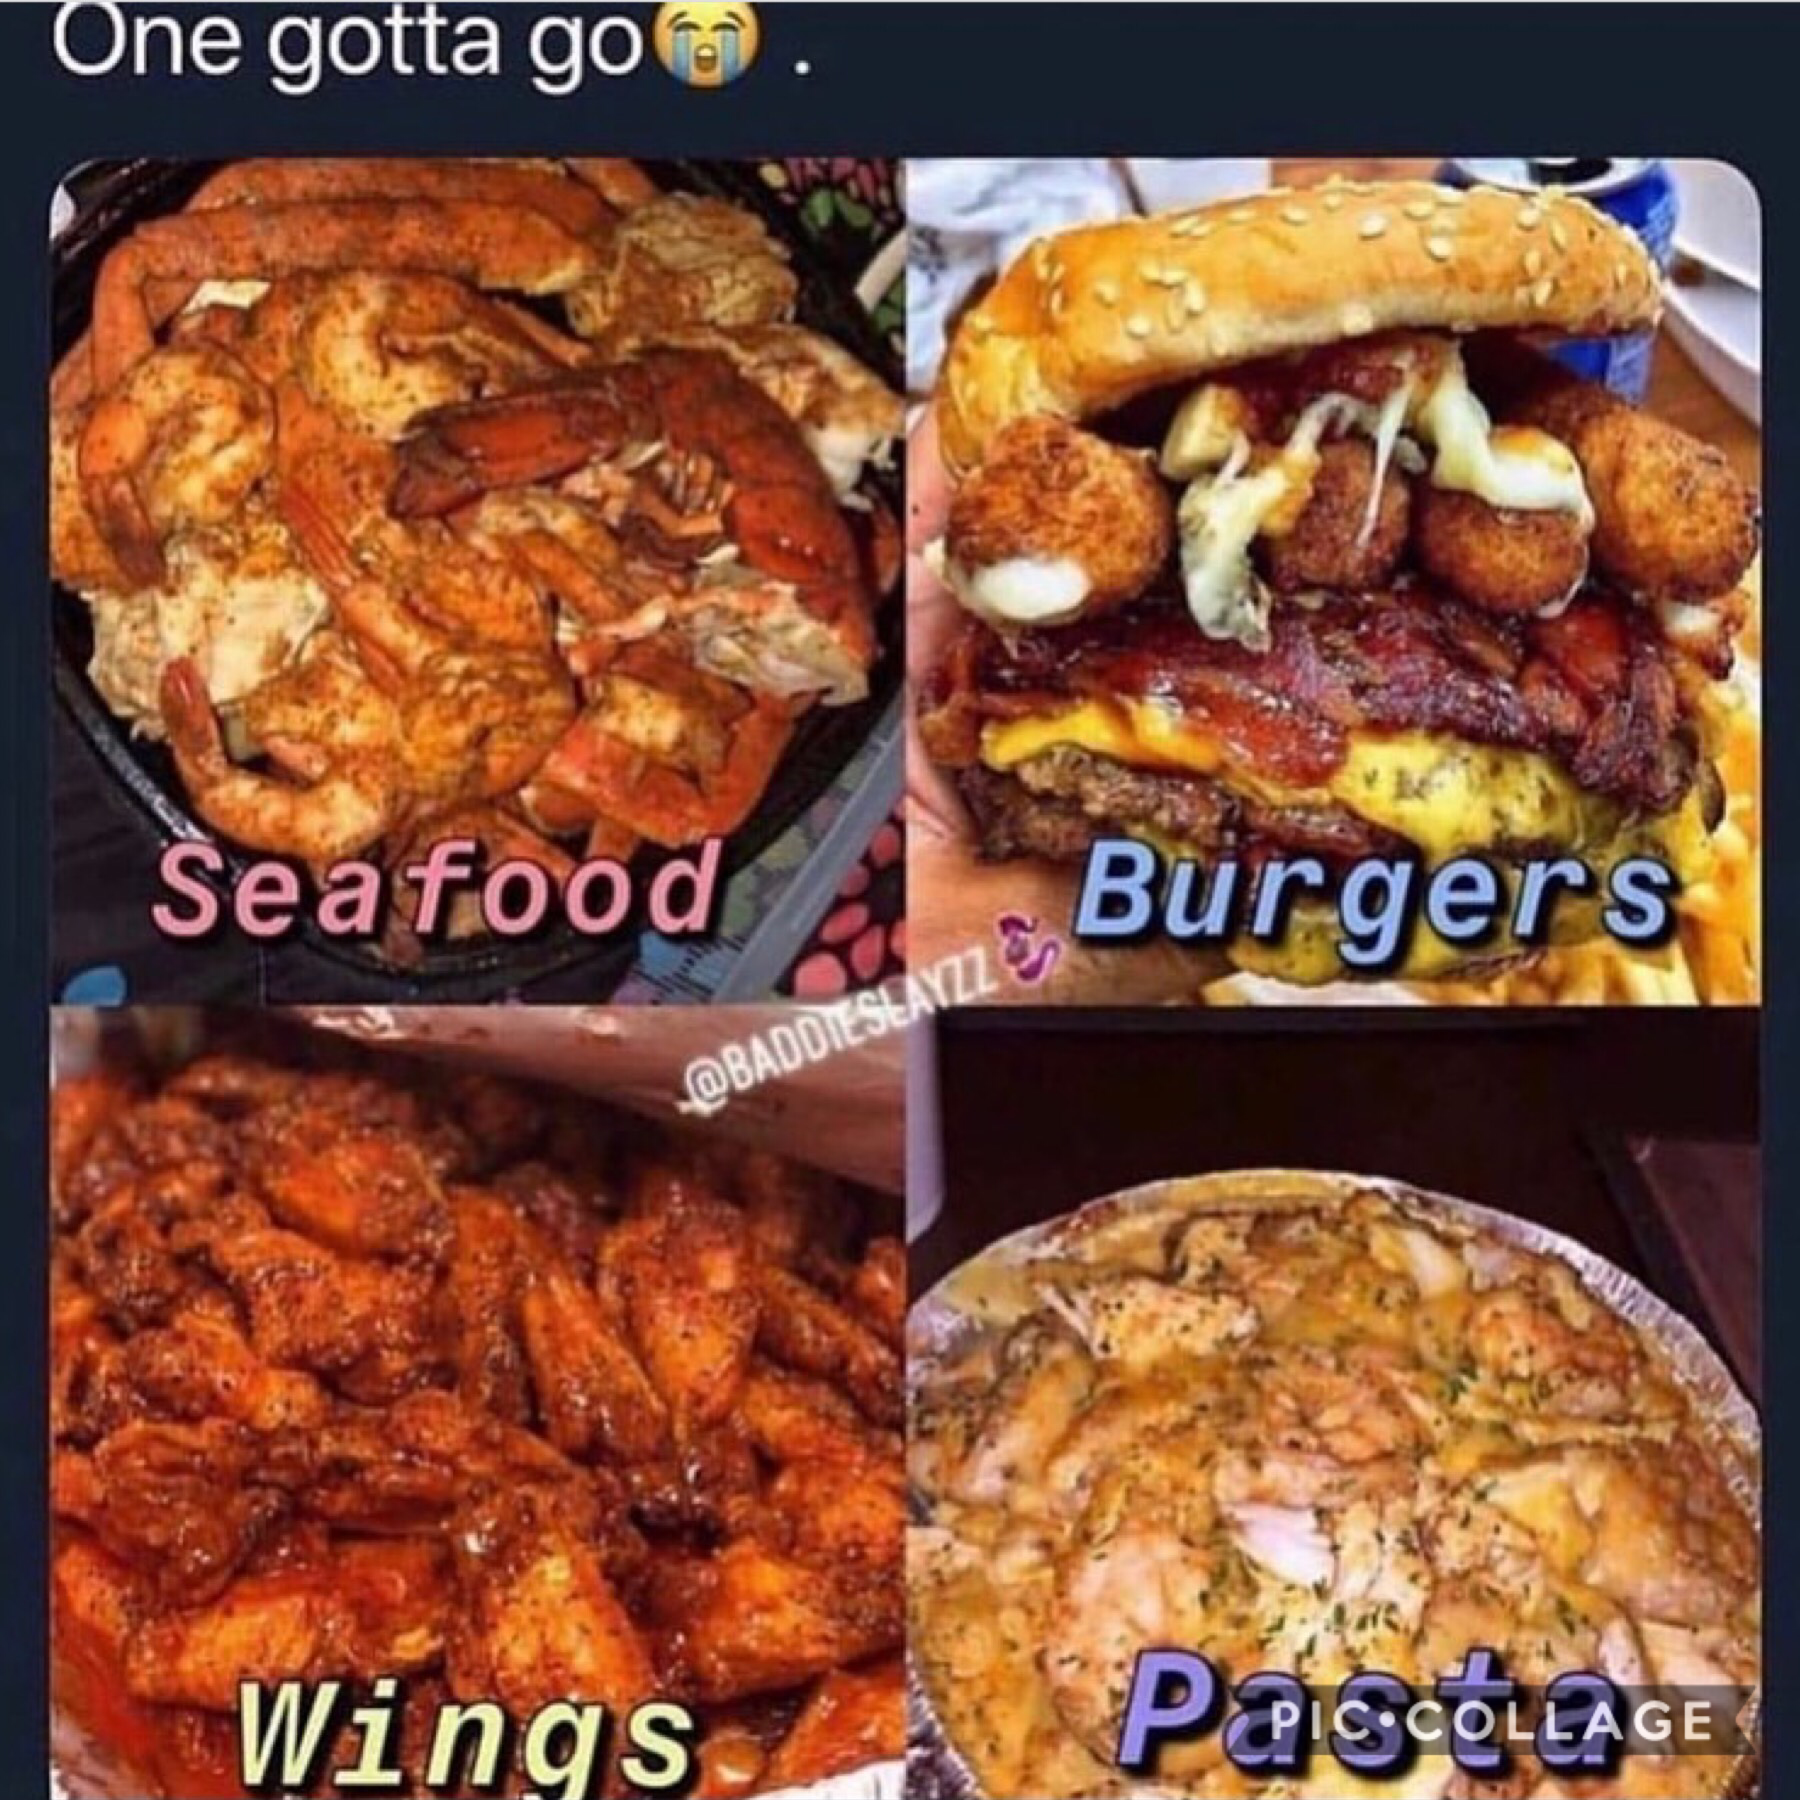 Seafood 100% that stuff is disgusting 🤮